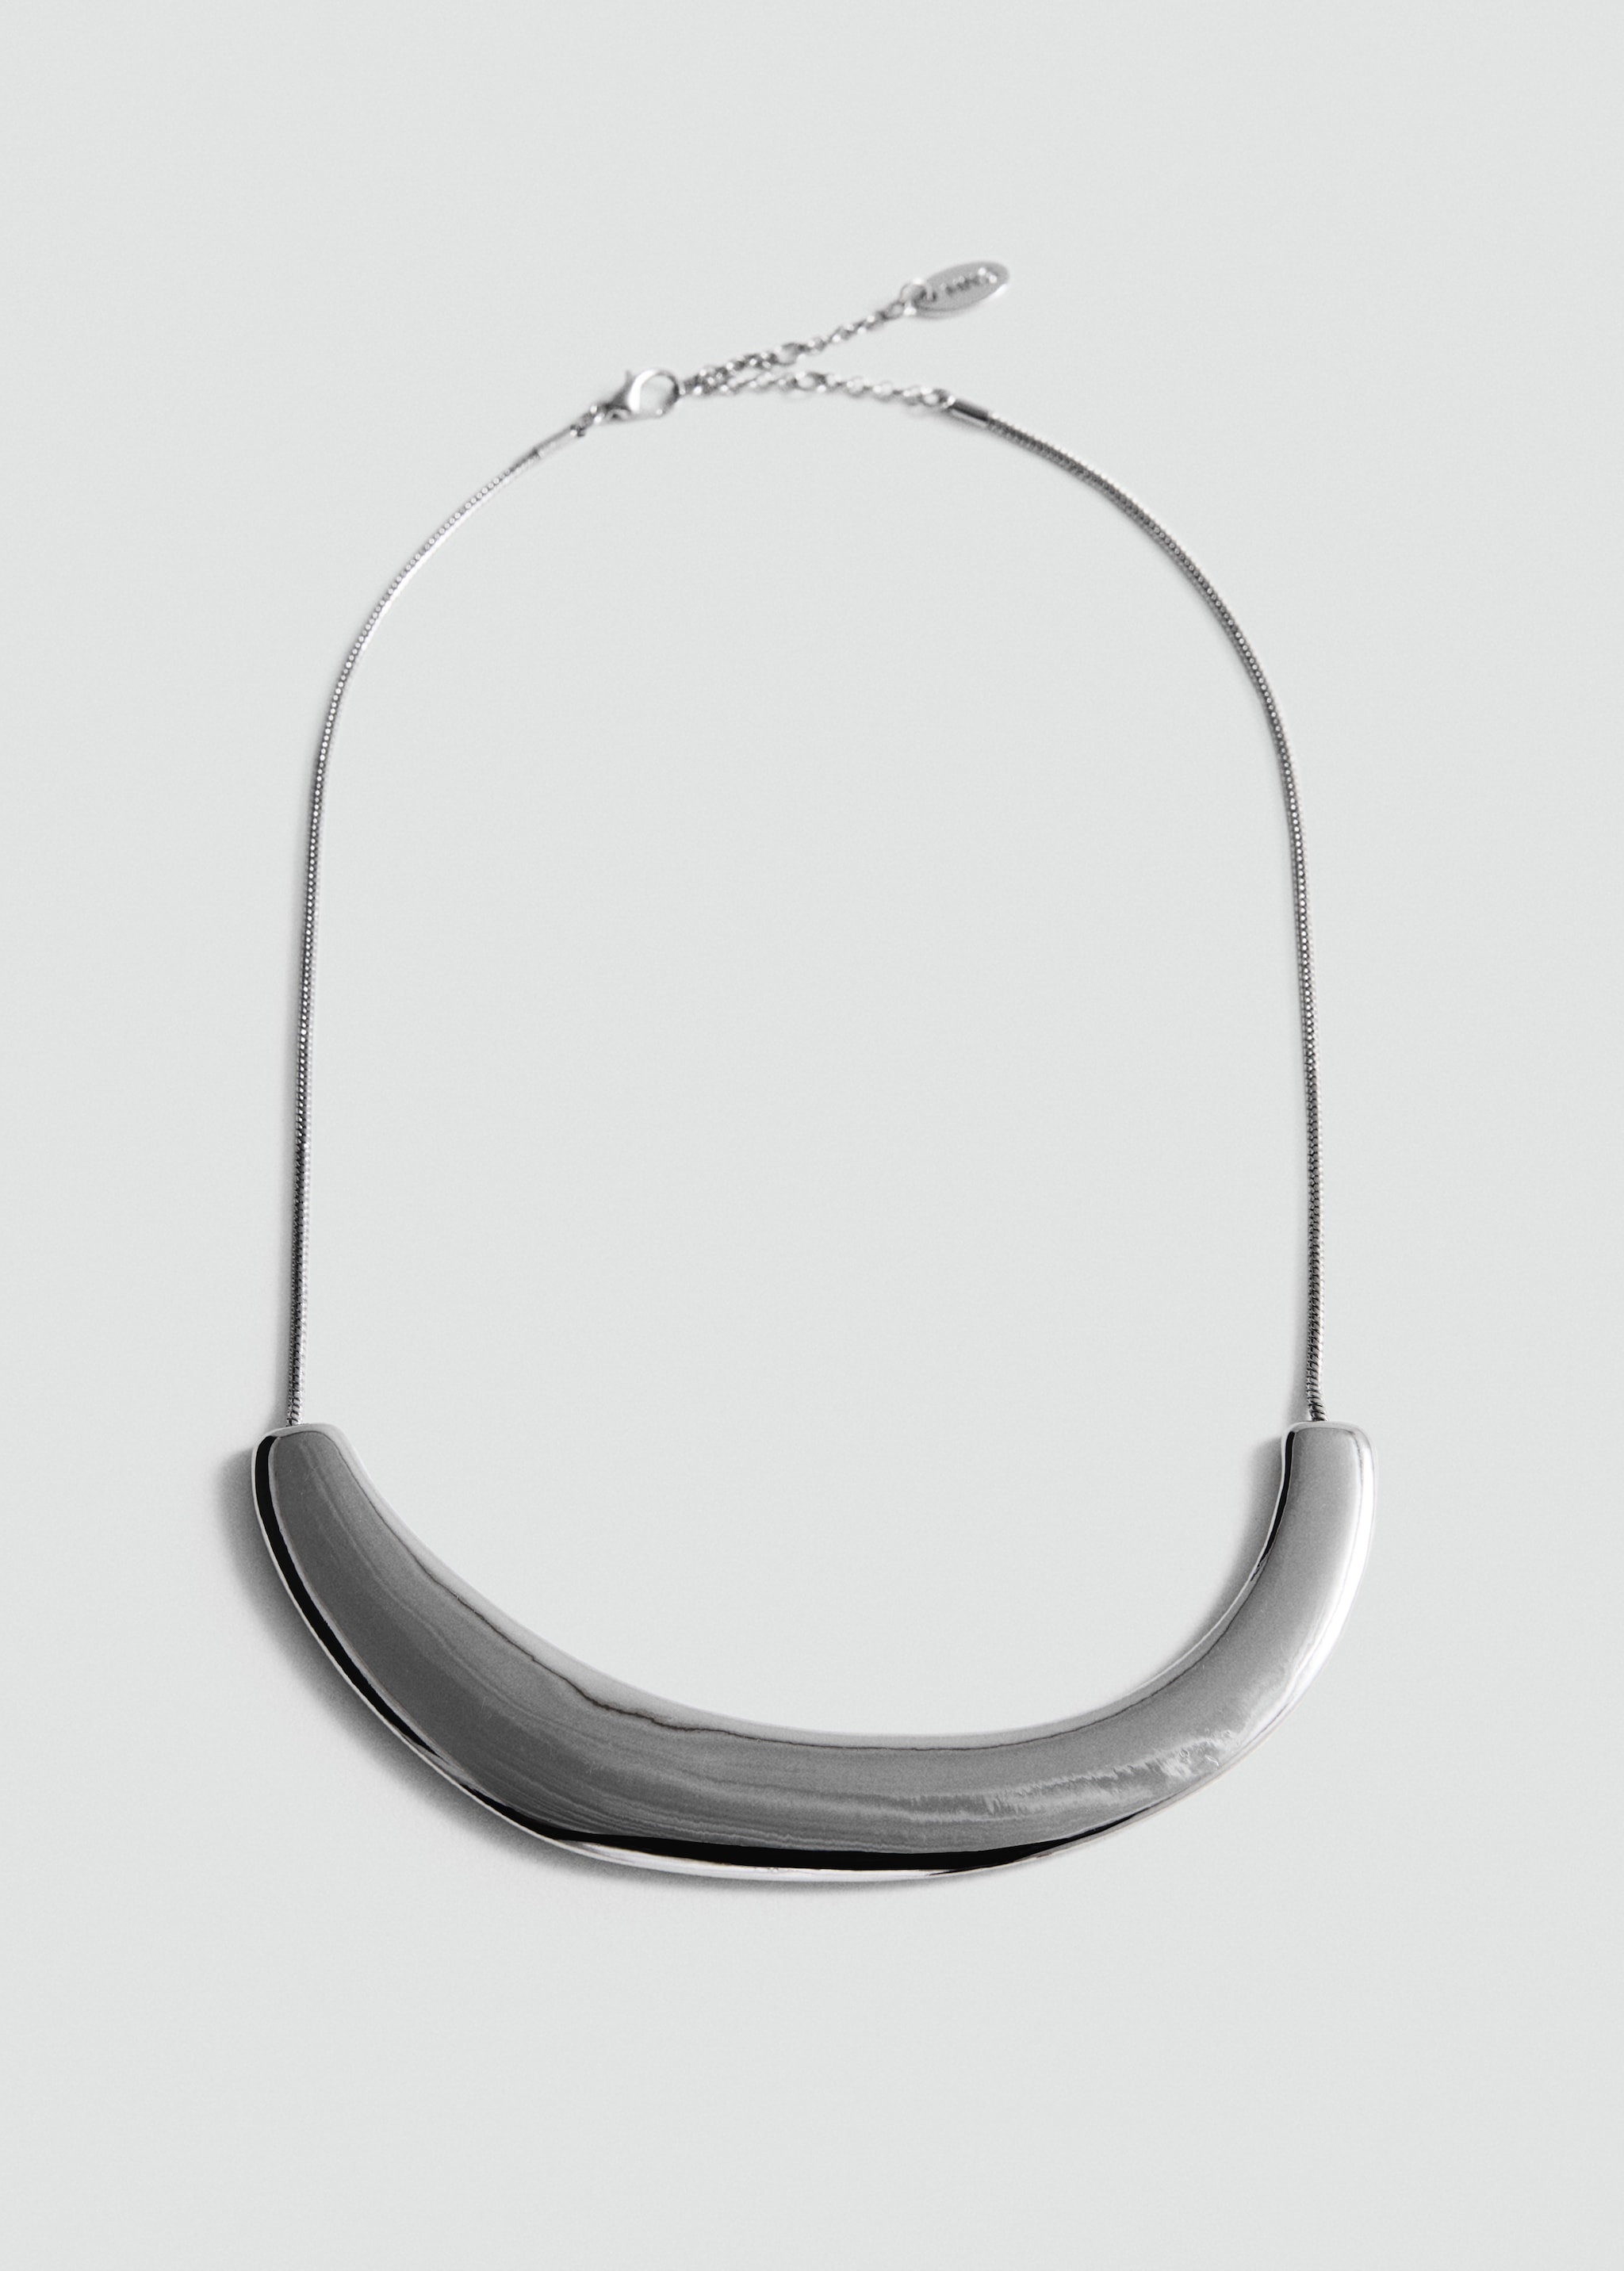 Rigid combination necklace - Article without model